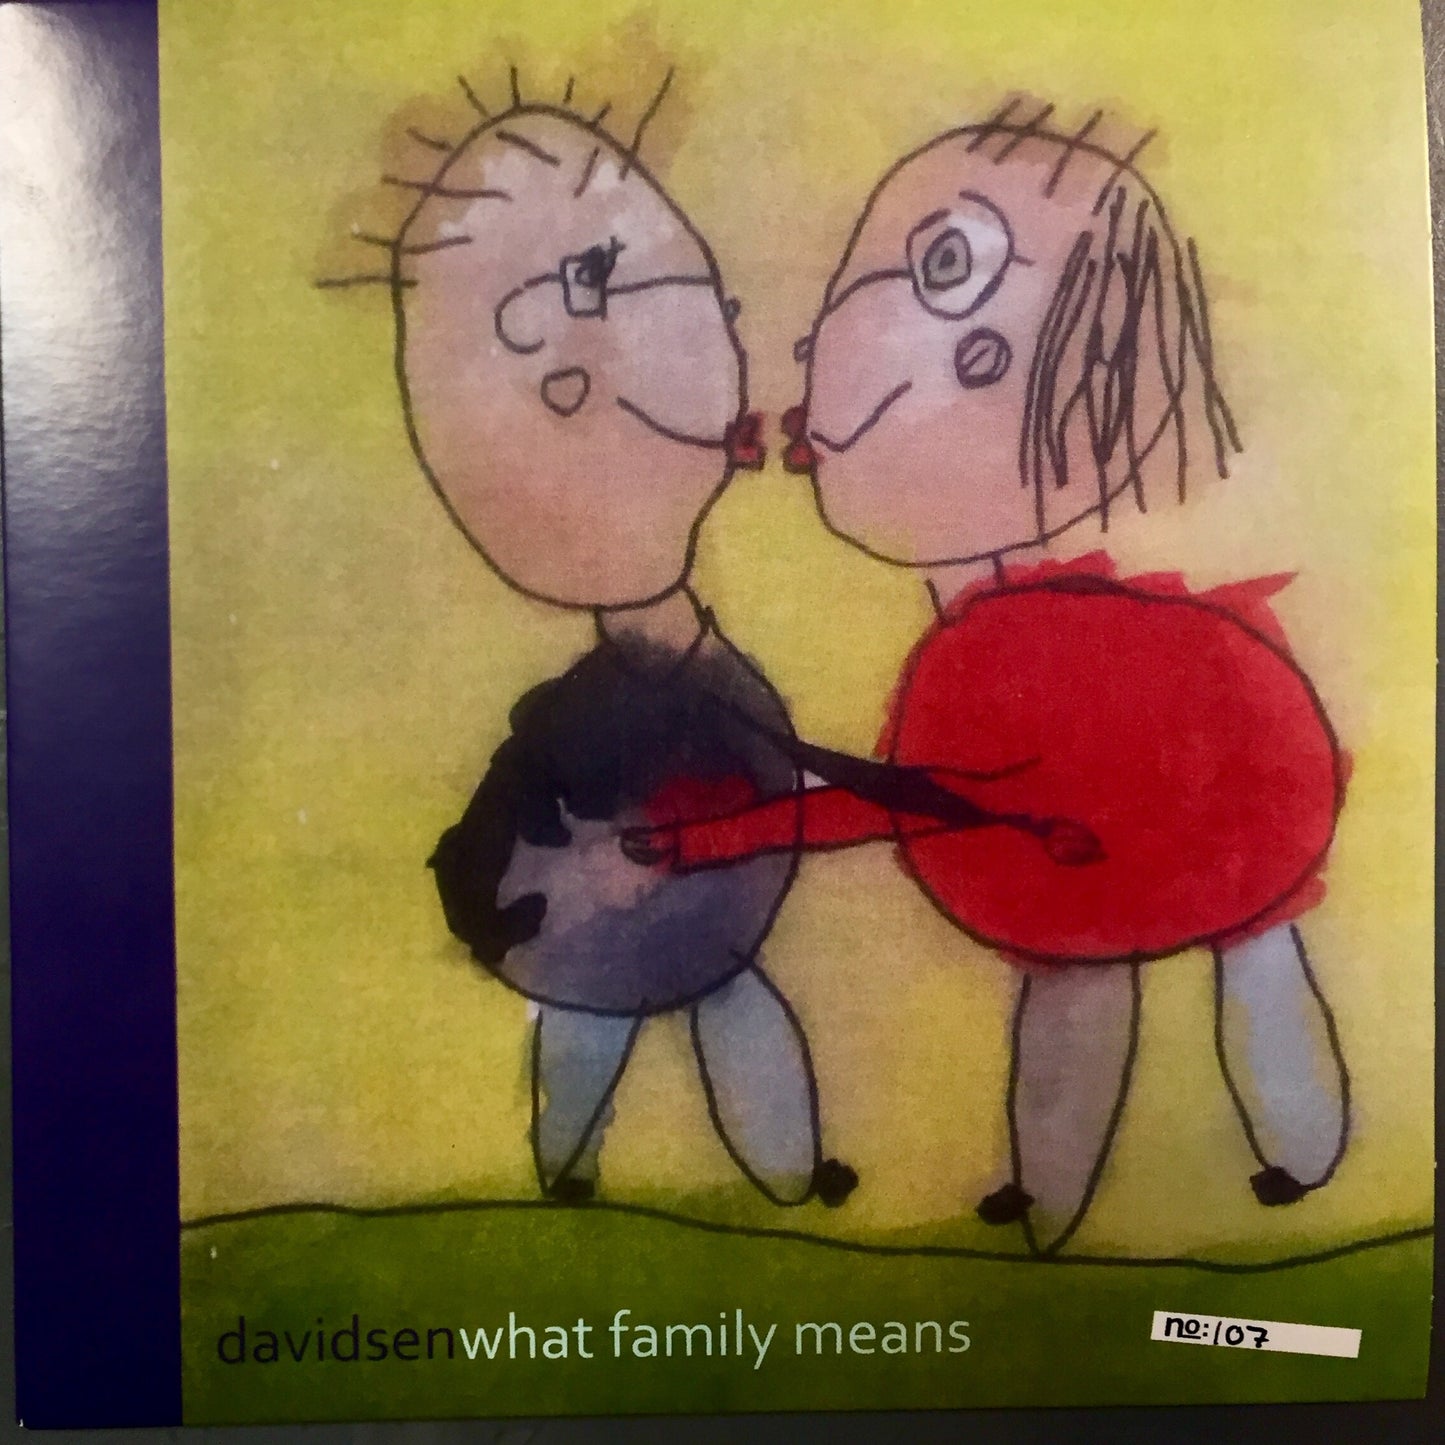 davidsen - What Family Means